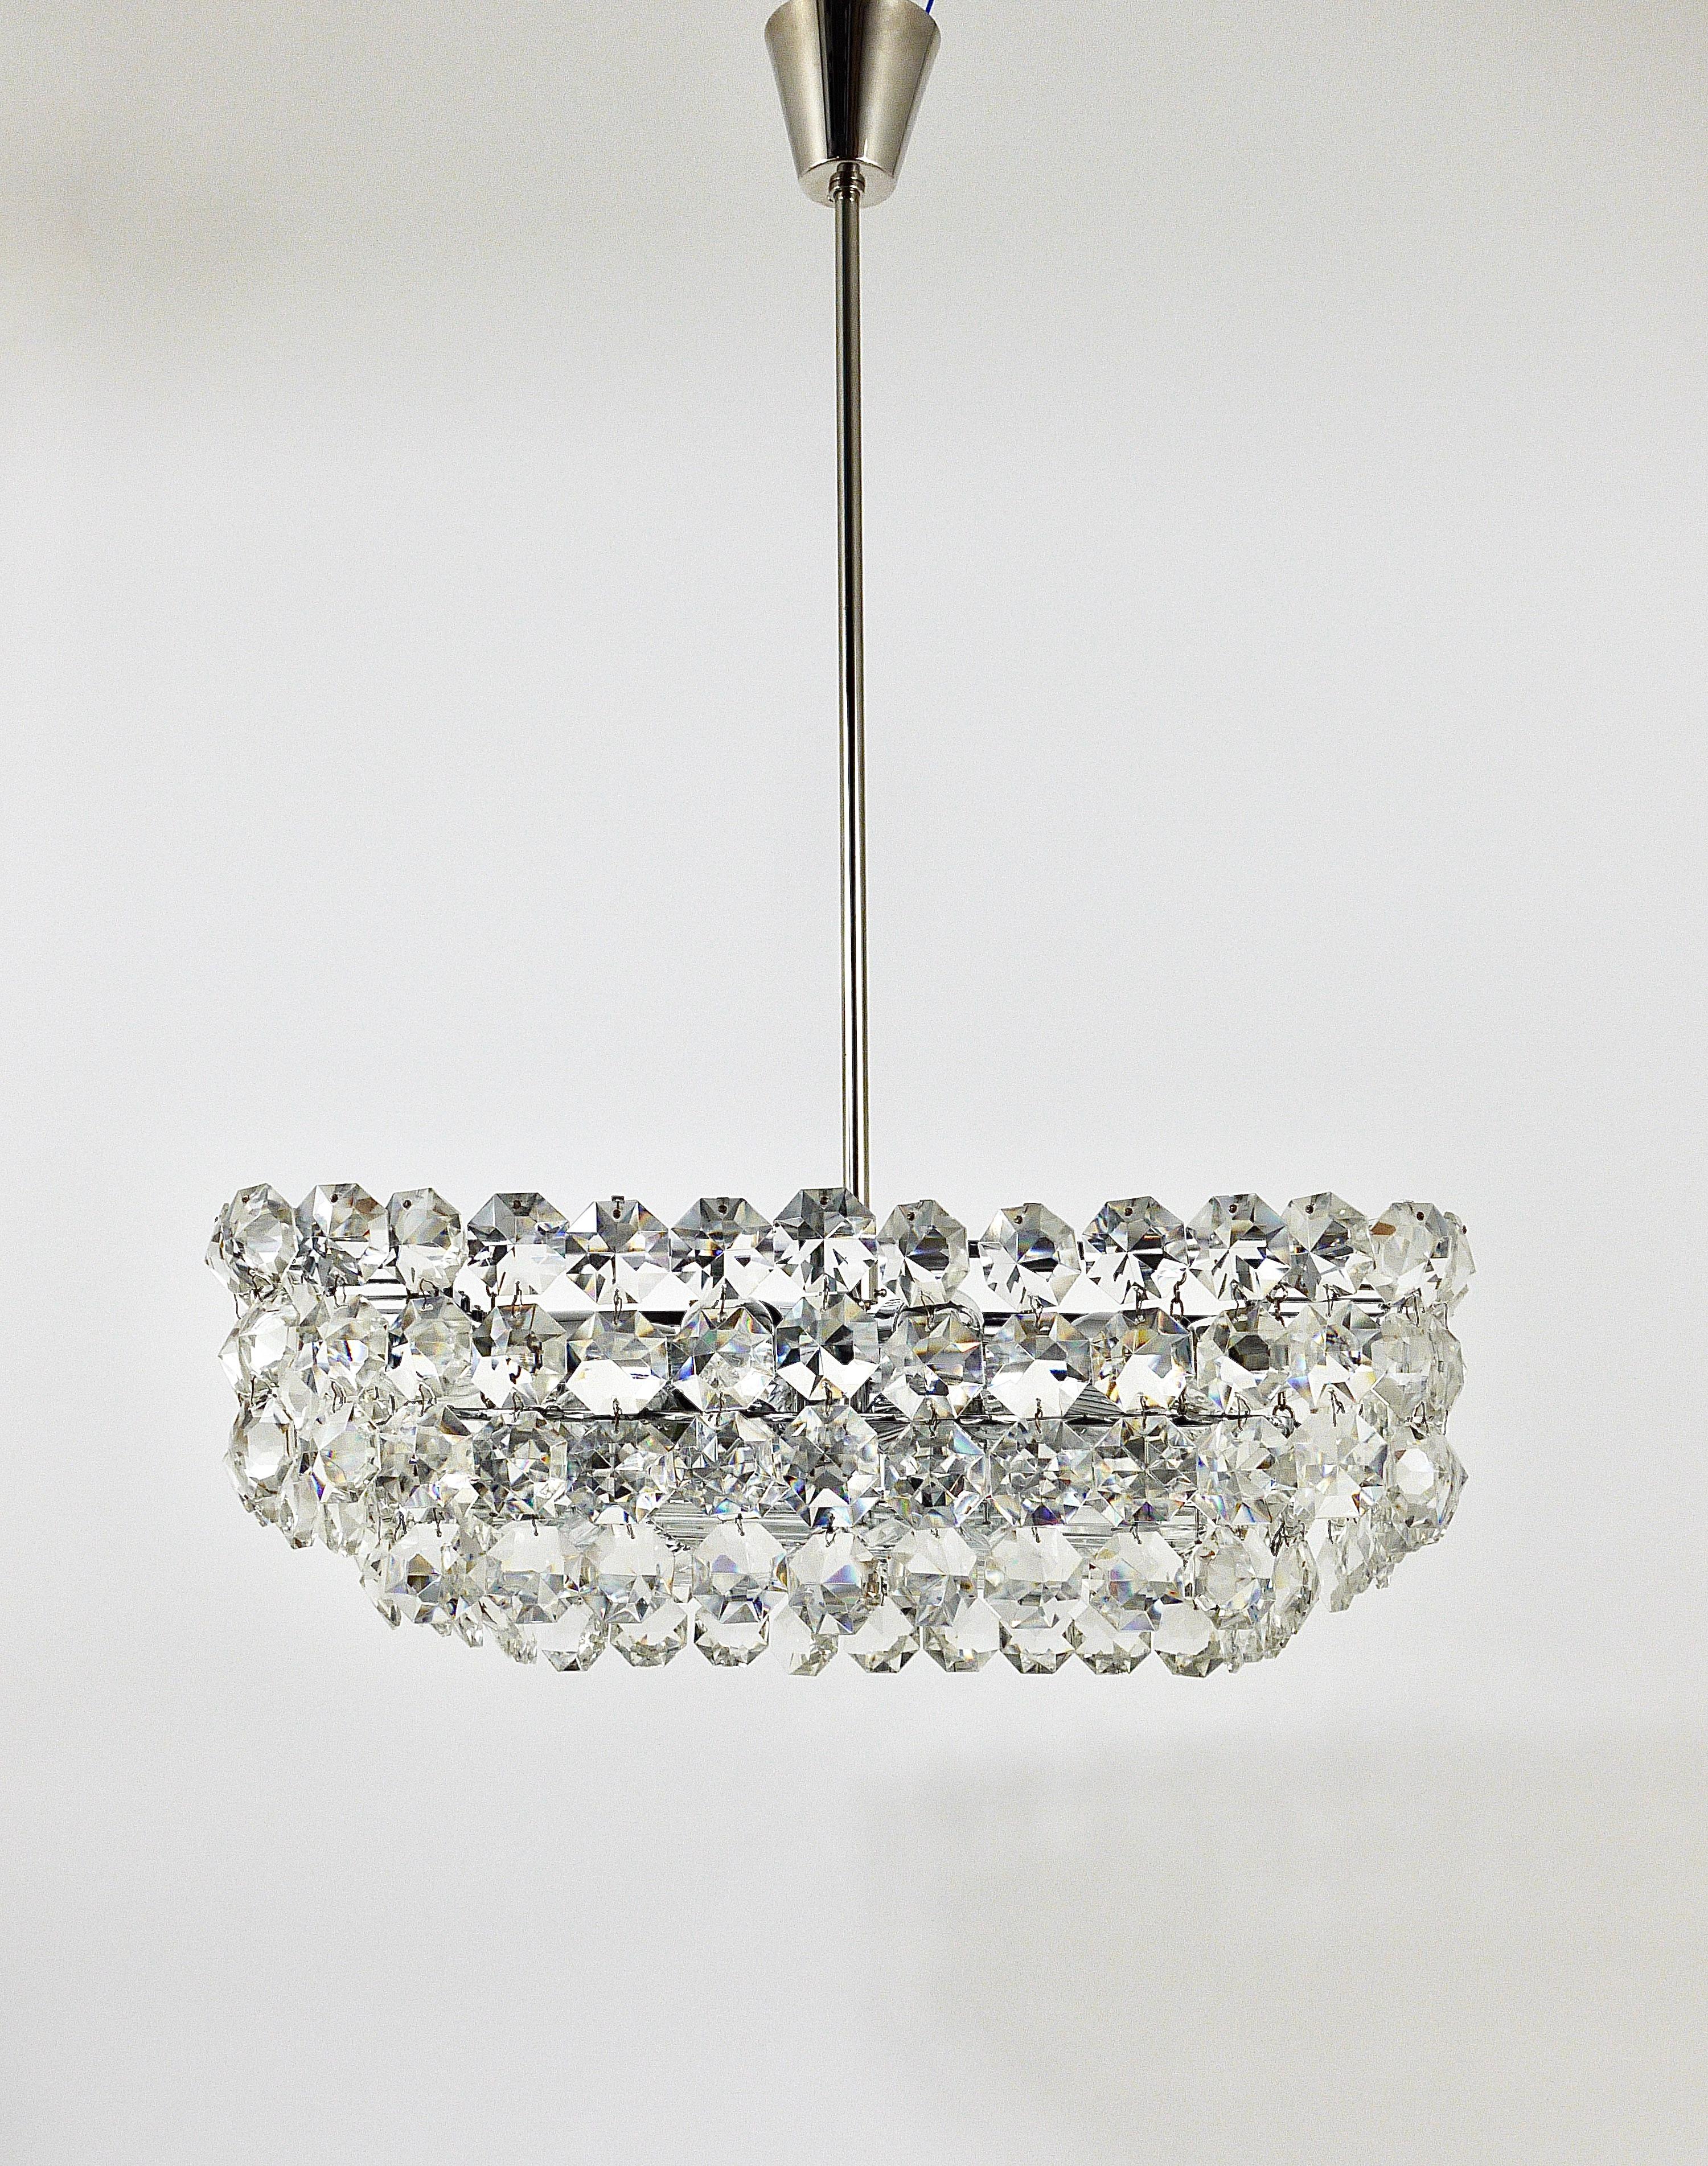 Large Square Bakalowits Chandelier with Diamond-Shaped Crystals, Austria, 1950s For Sale 2